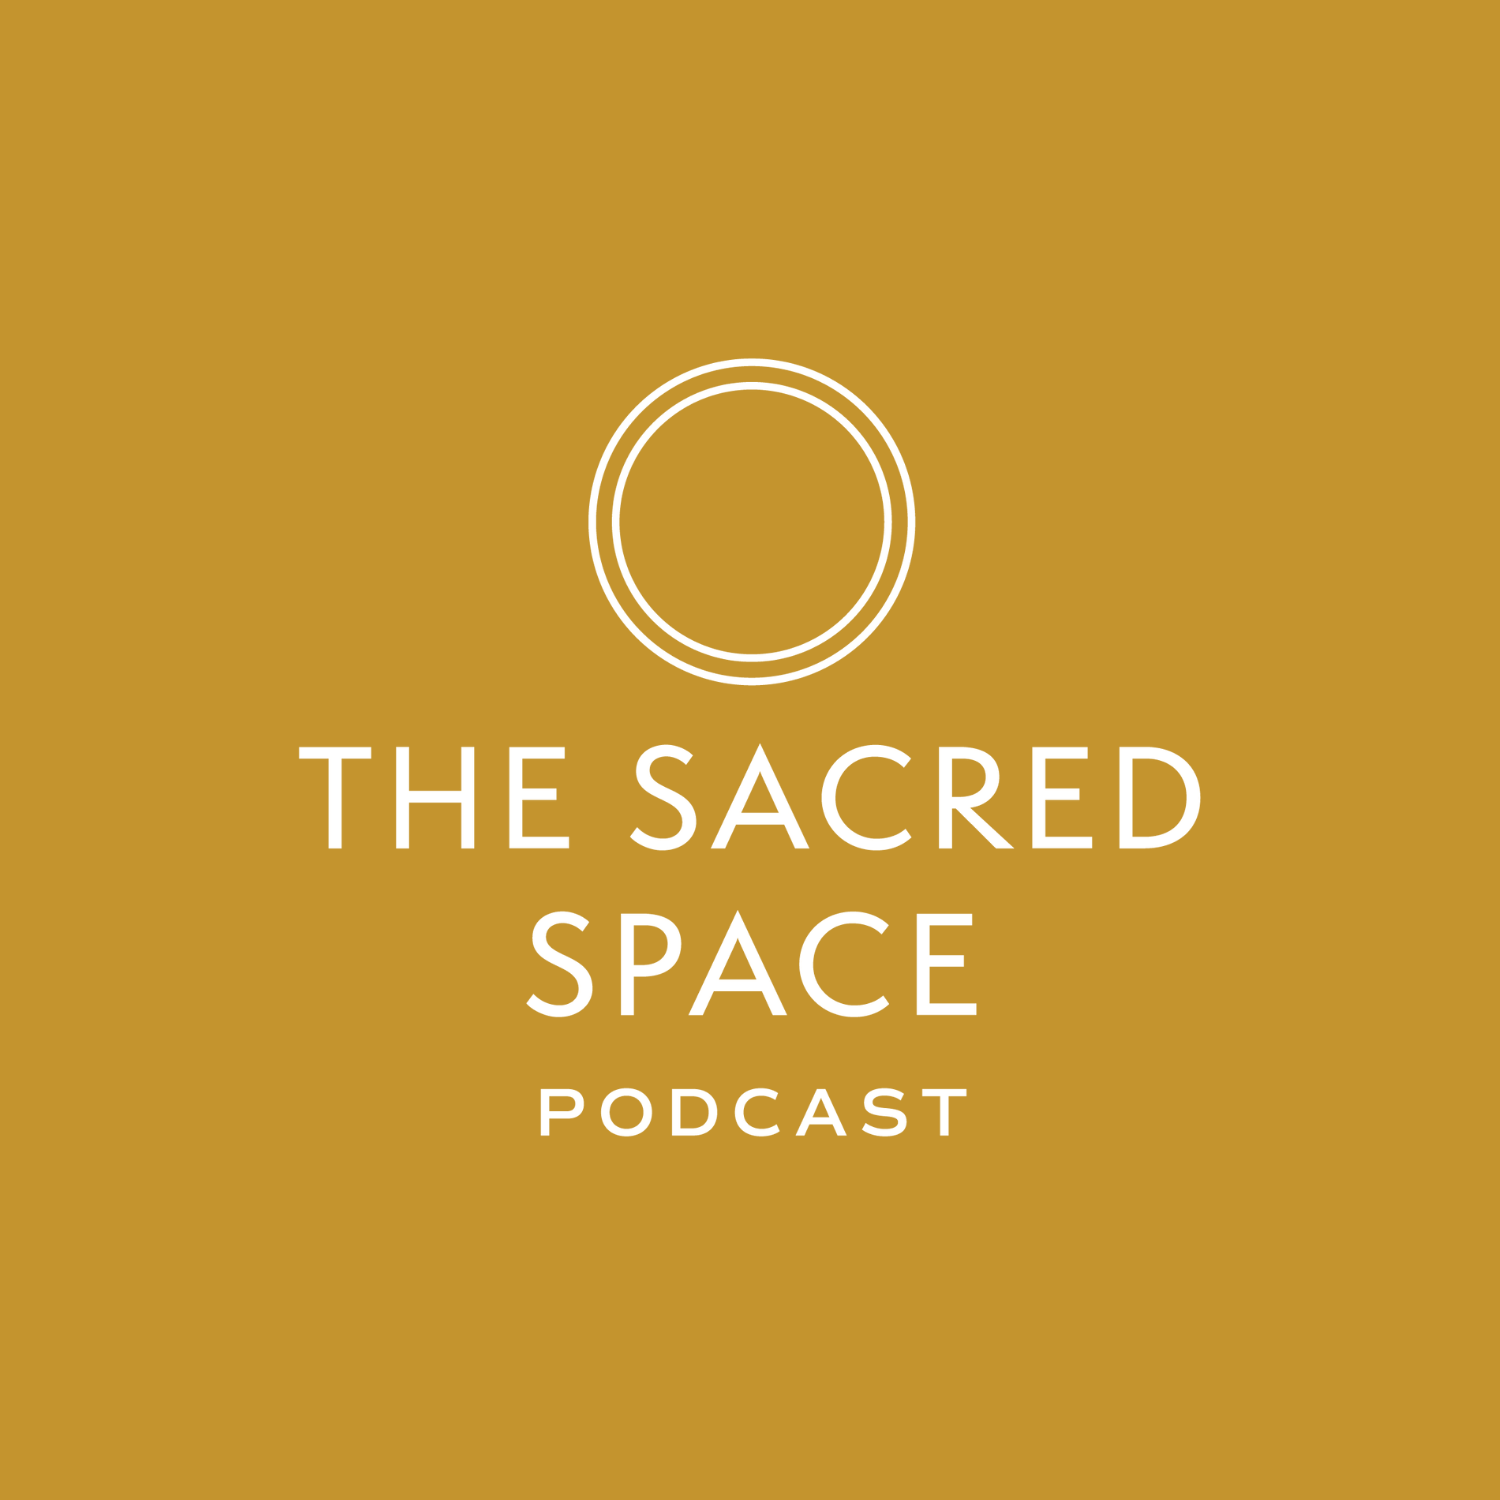 The Sacred Space Podcast